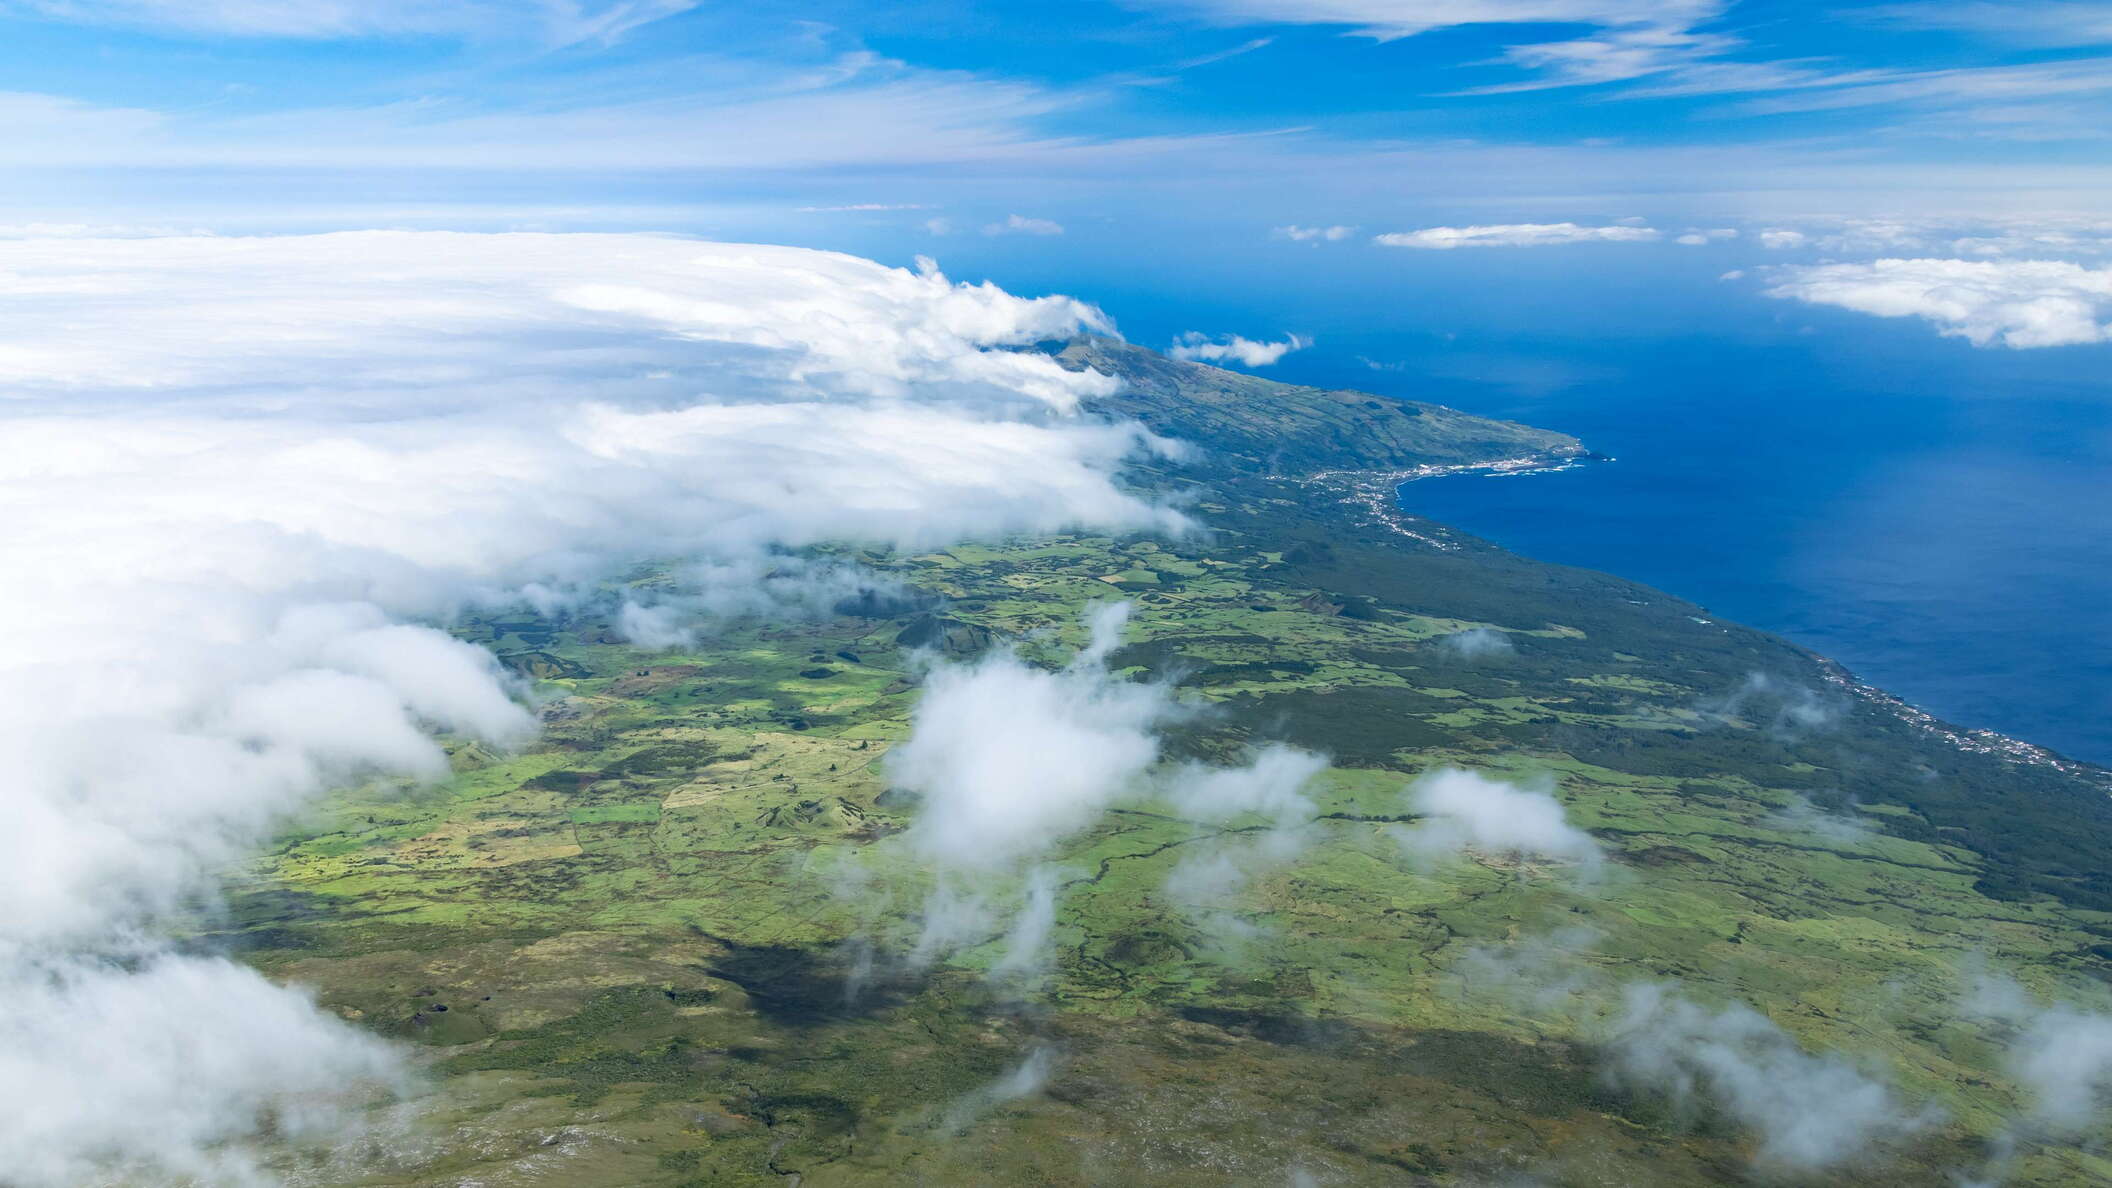 Highland and south coast with Lajes do Pico